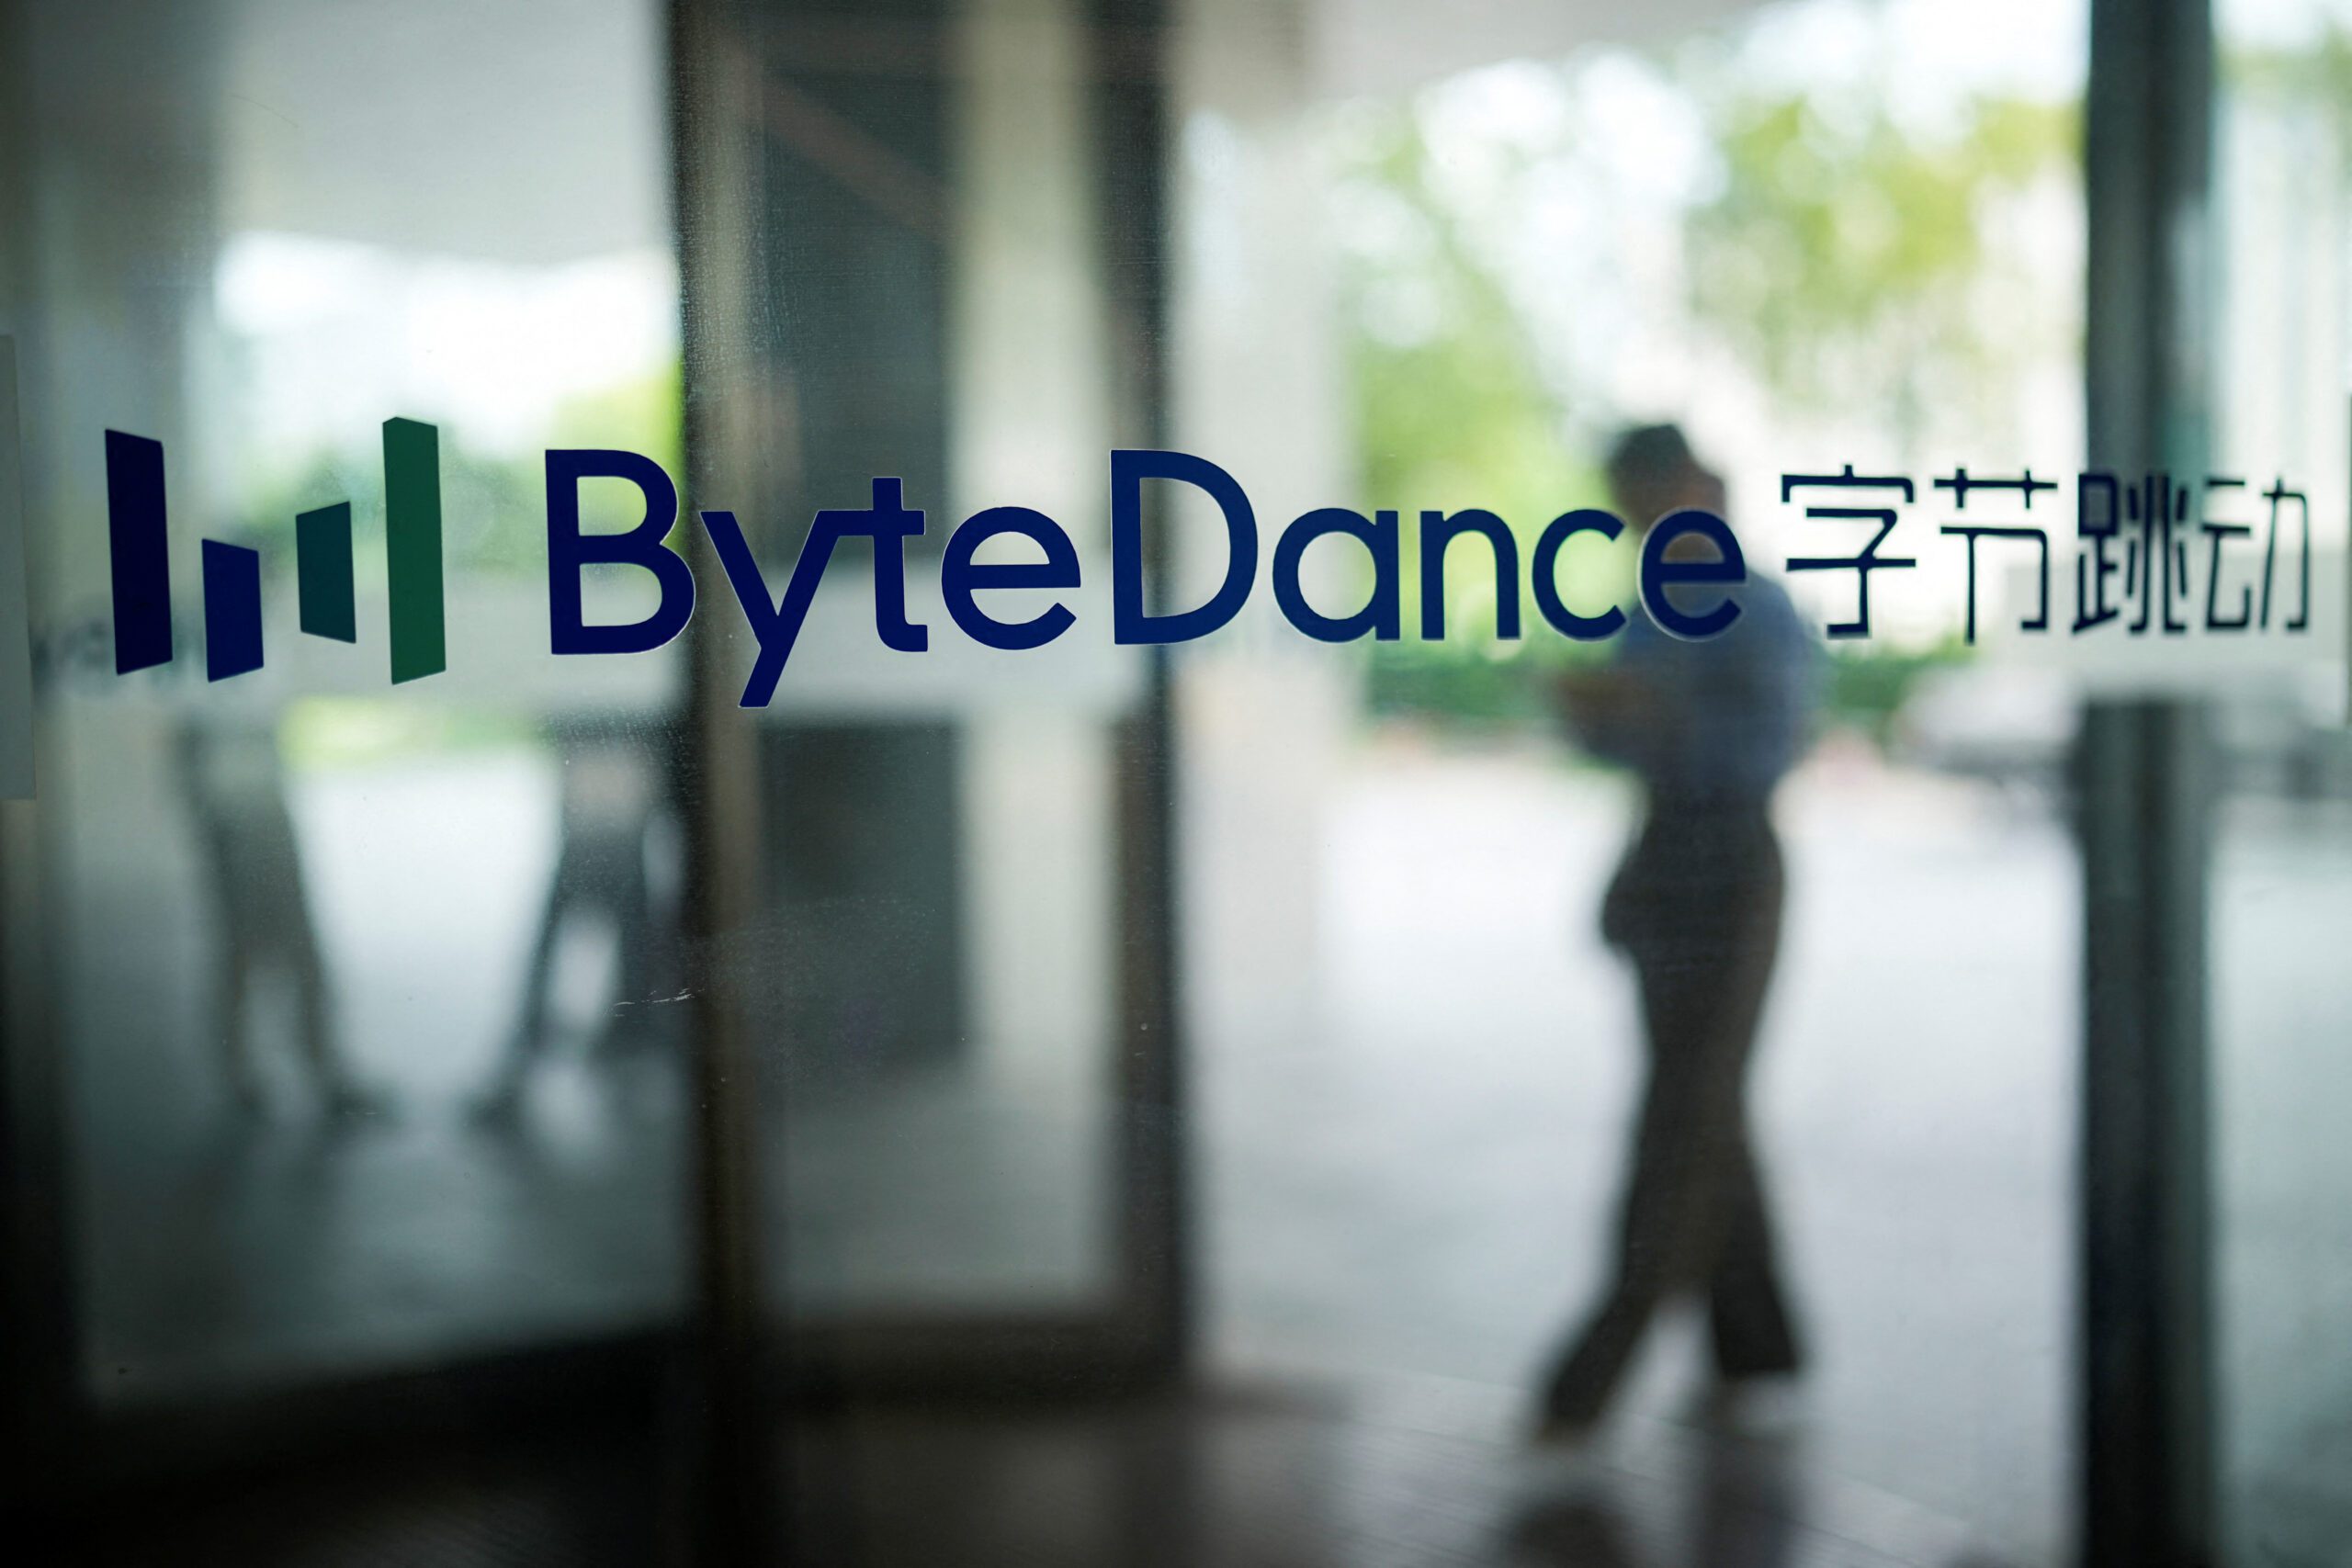 TikTok owner ByteDance offers to buy back shares from staff at a steeply lower valuation